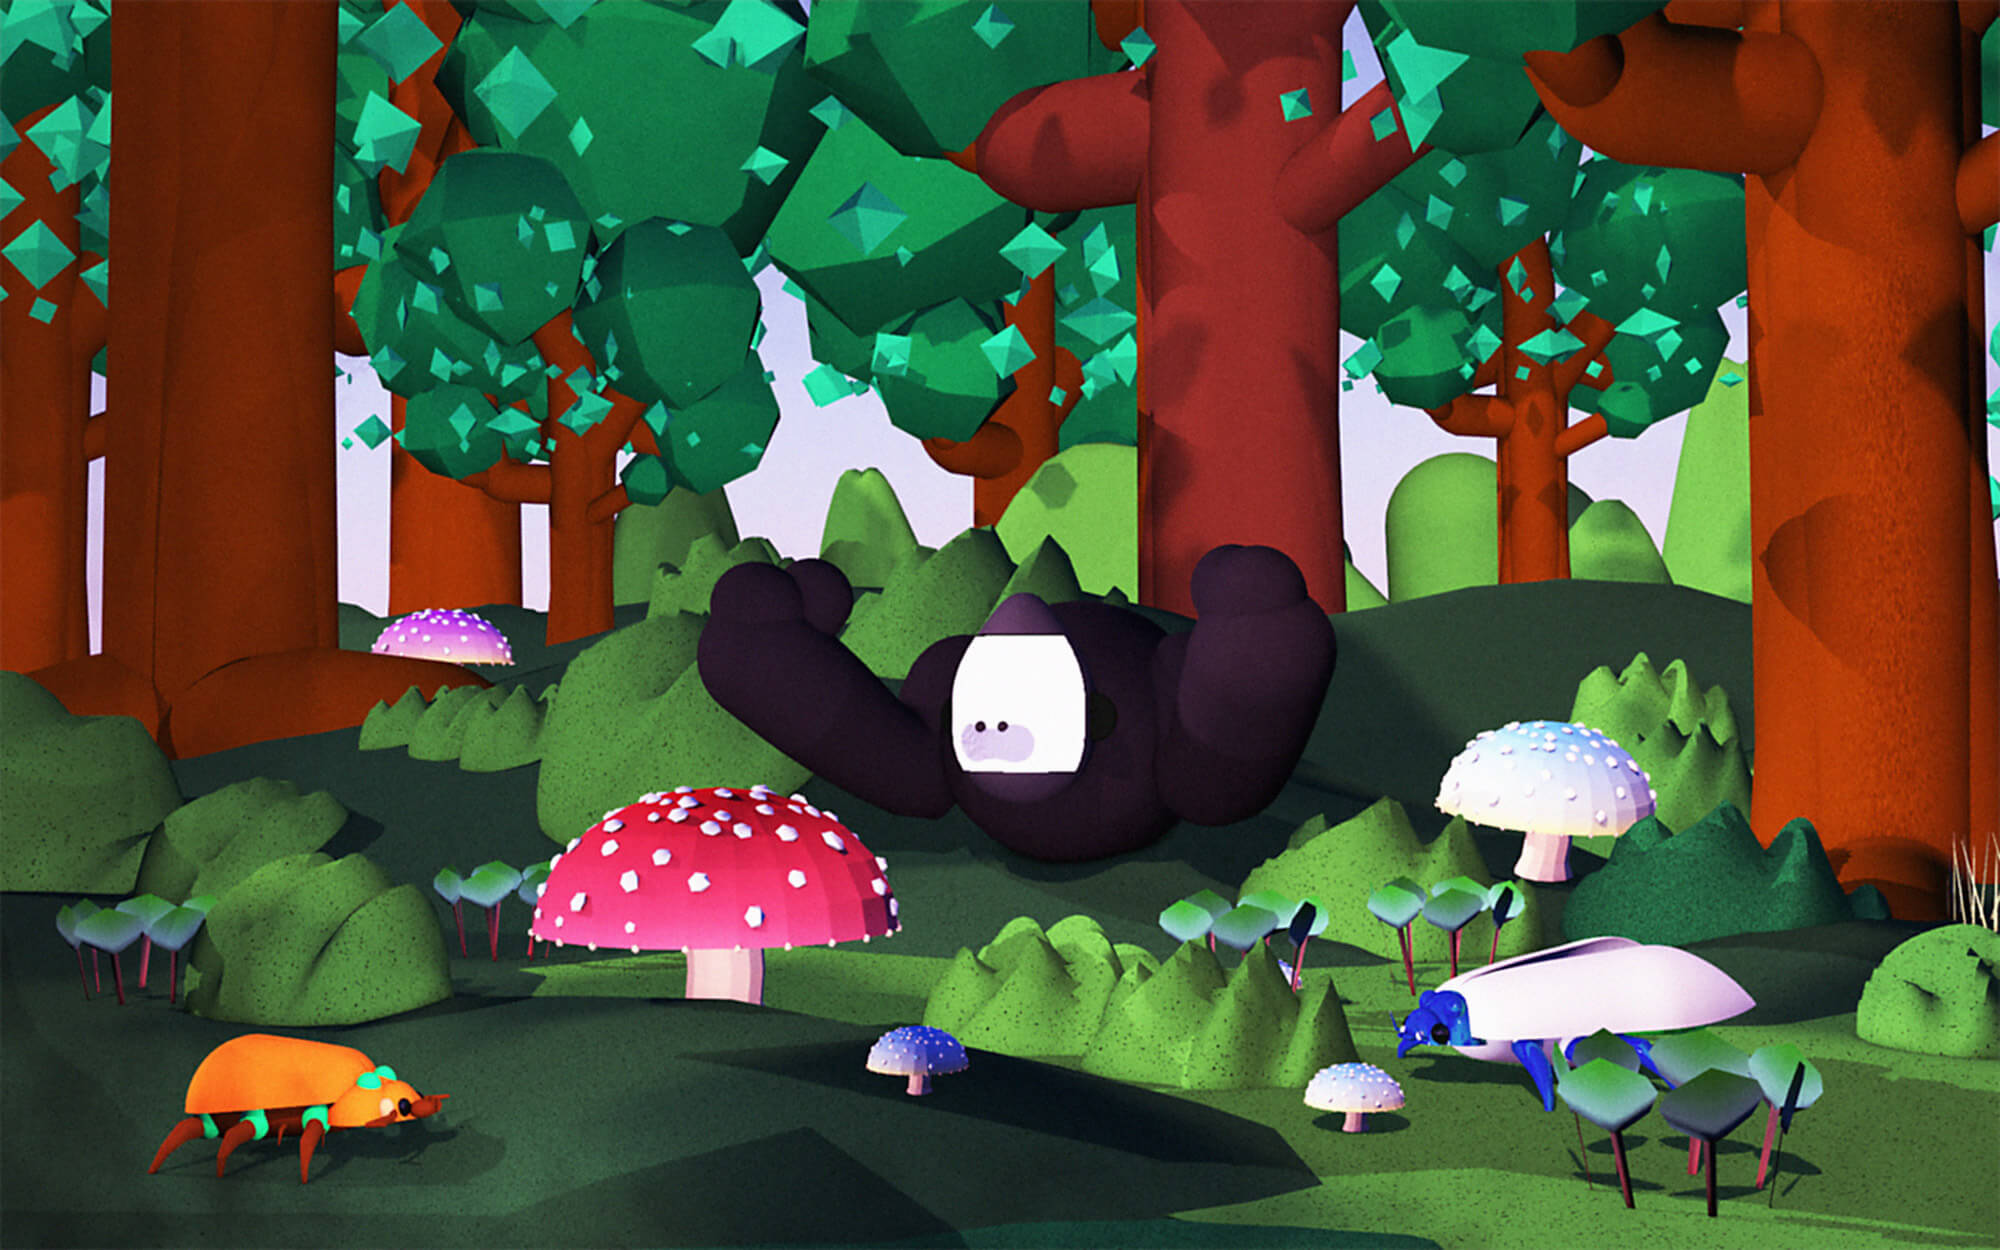 A 3D gorilla in the woods